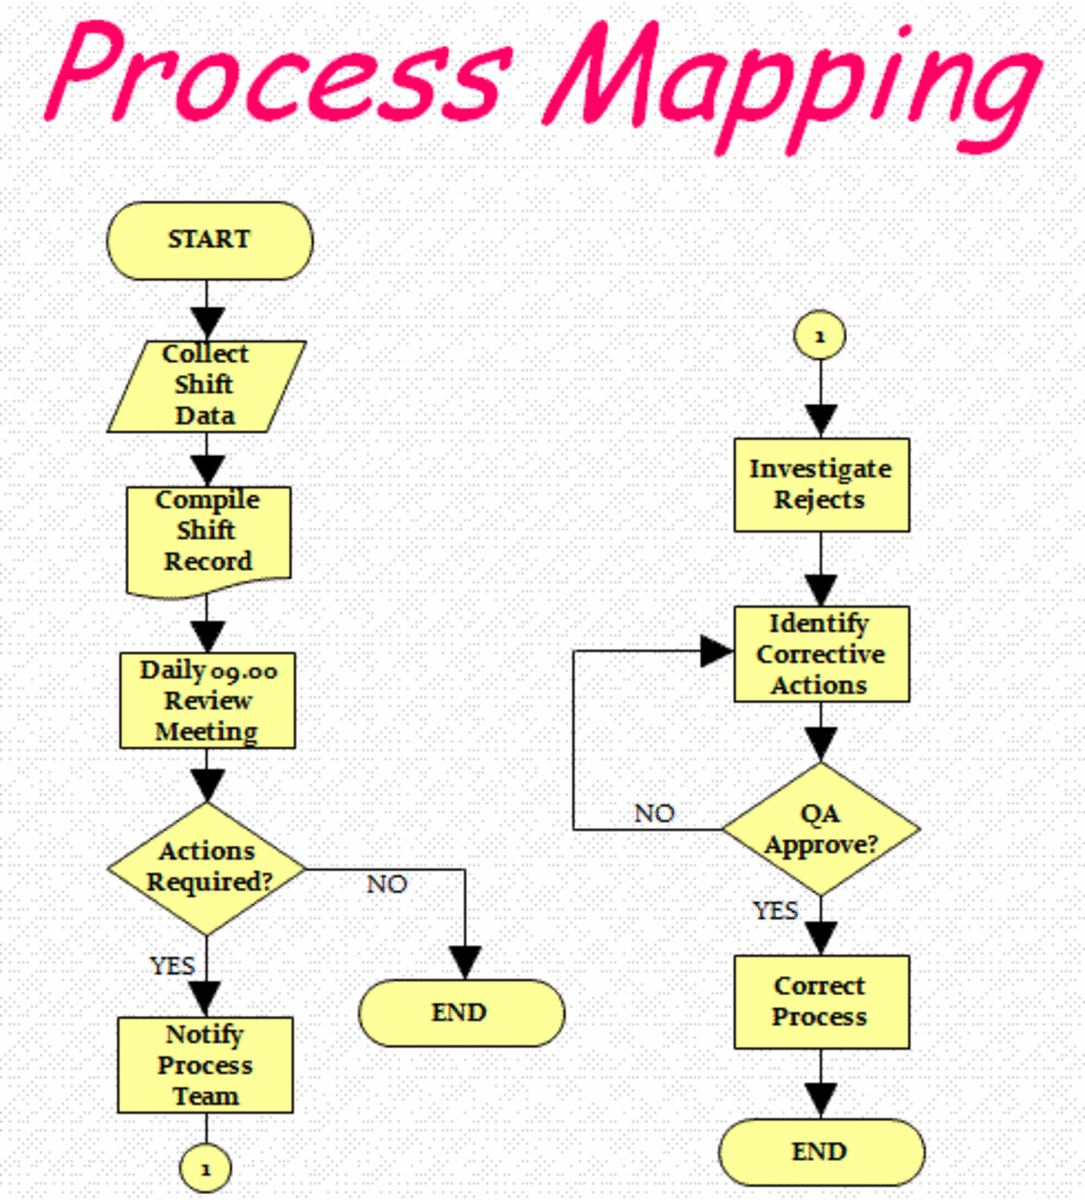 Flowcharts and Process Mapping